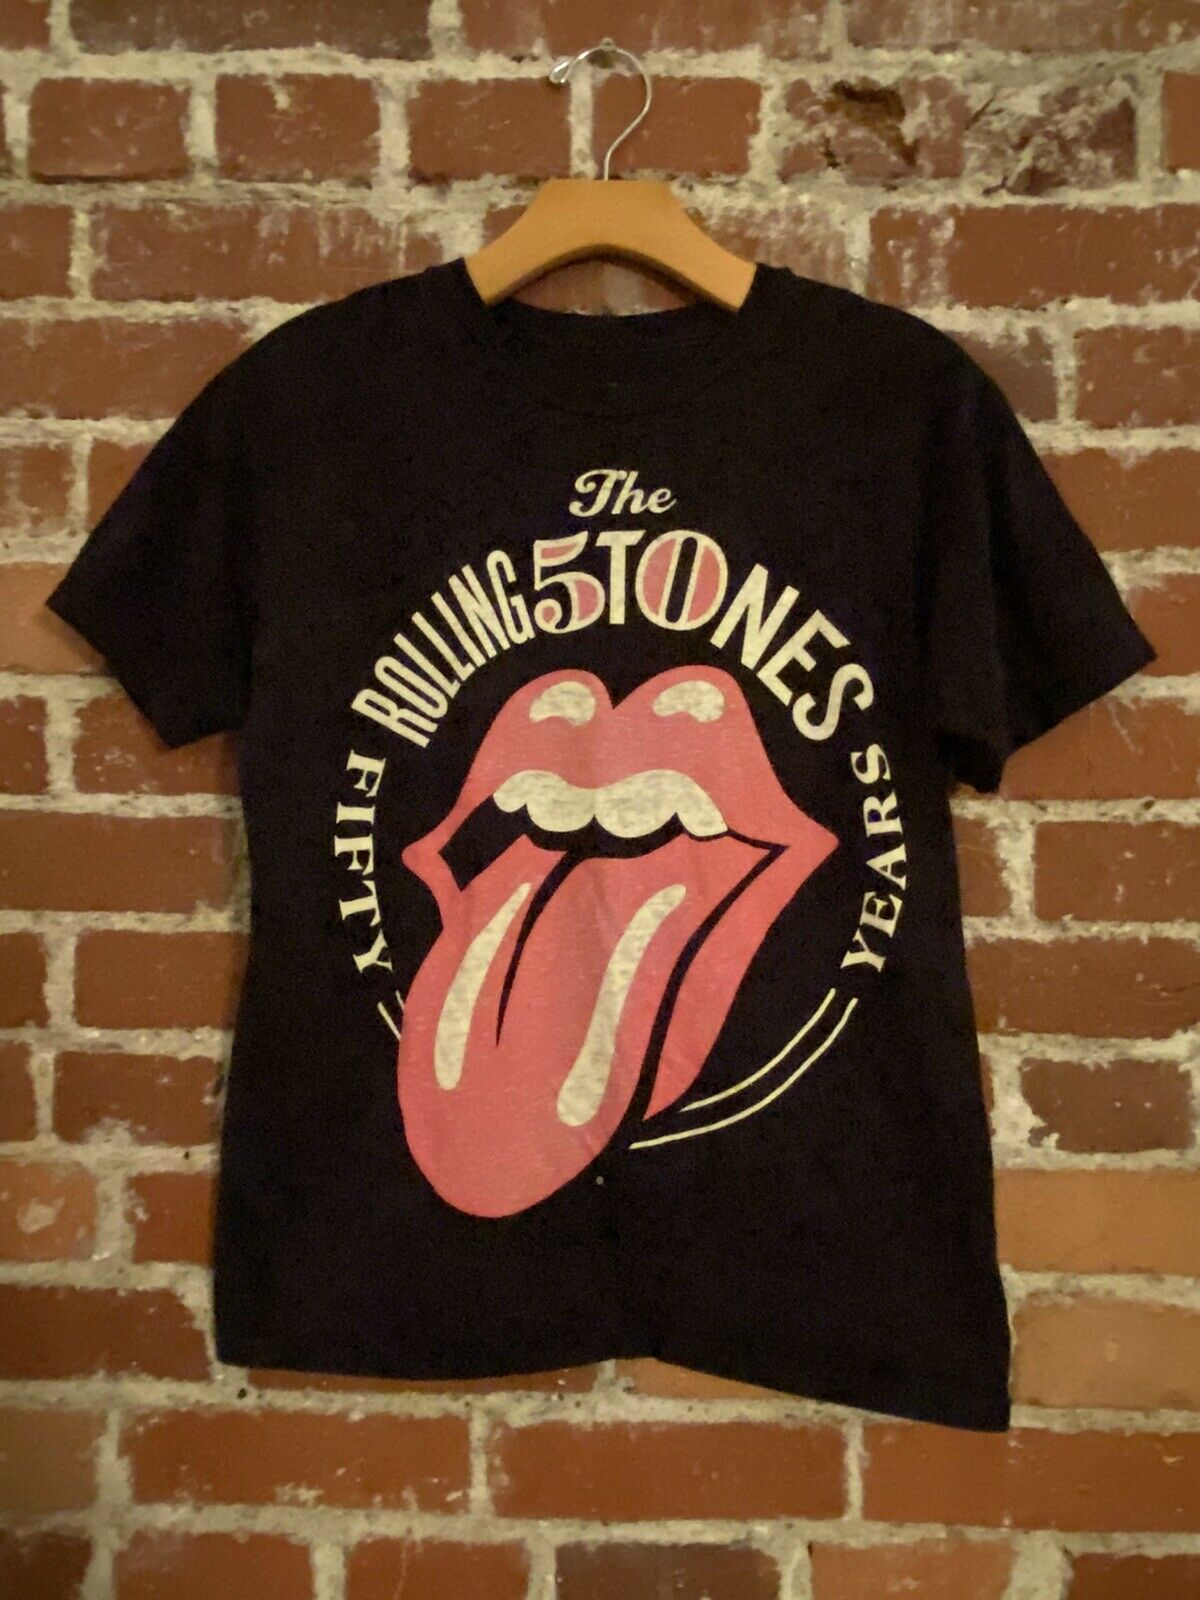 The Rolling Stones 50 Years Tour Shirt 2013 Size Small